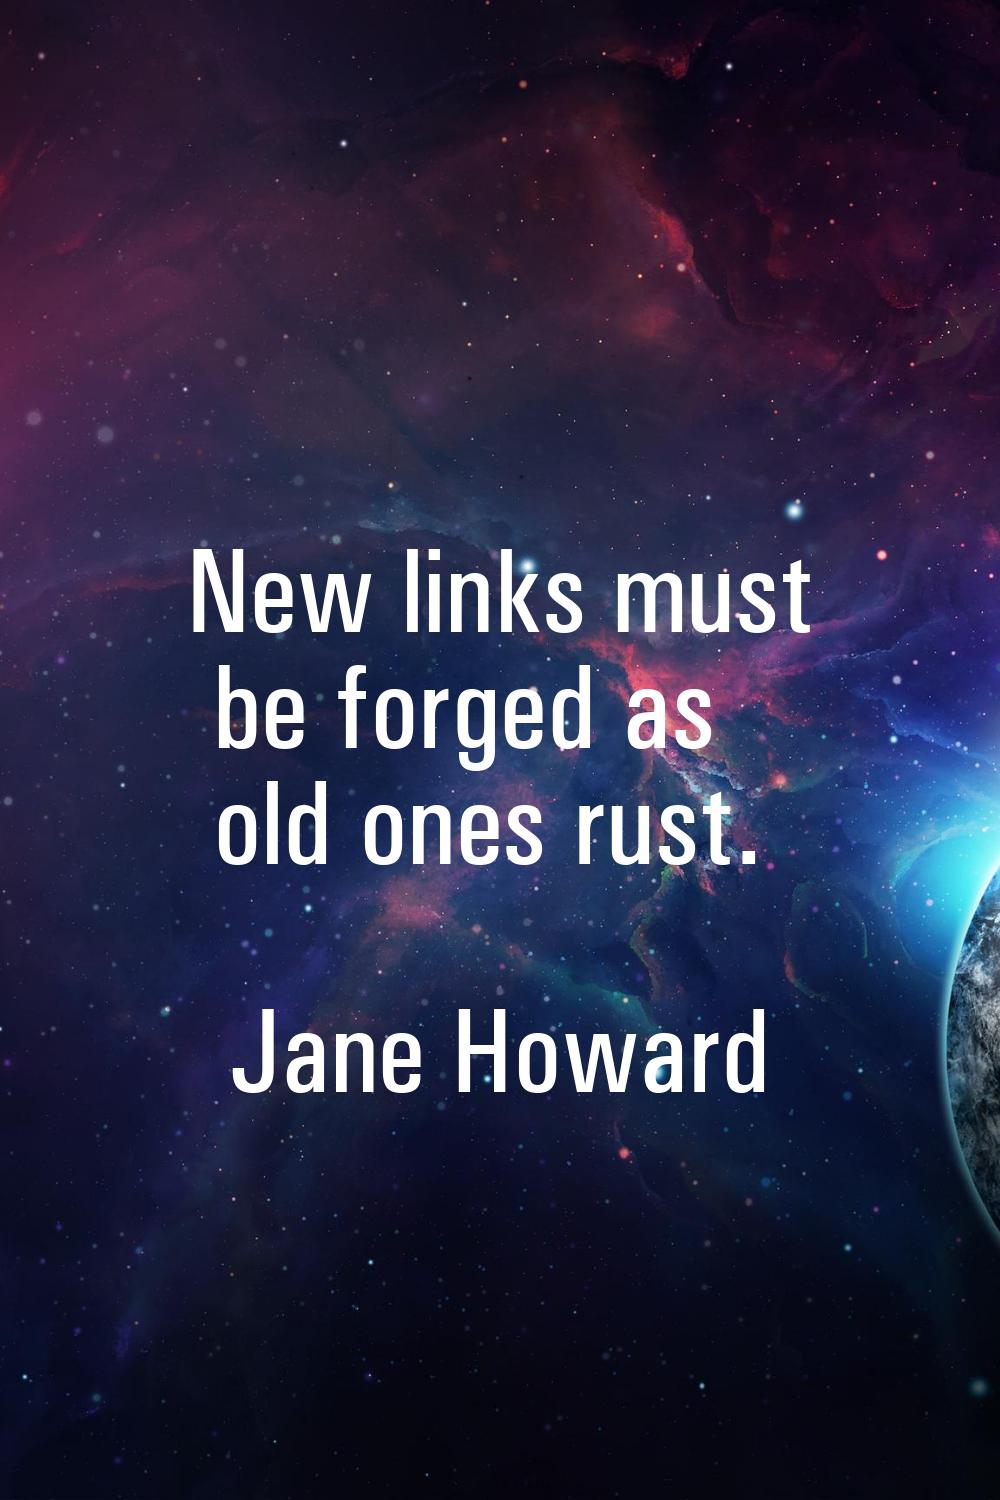 New links must be forged as old ones rust.